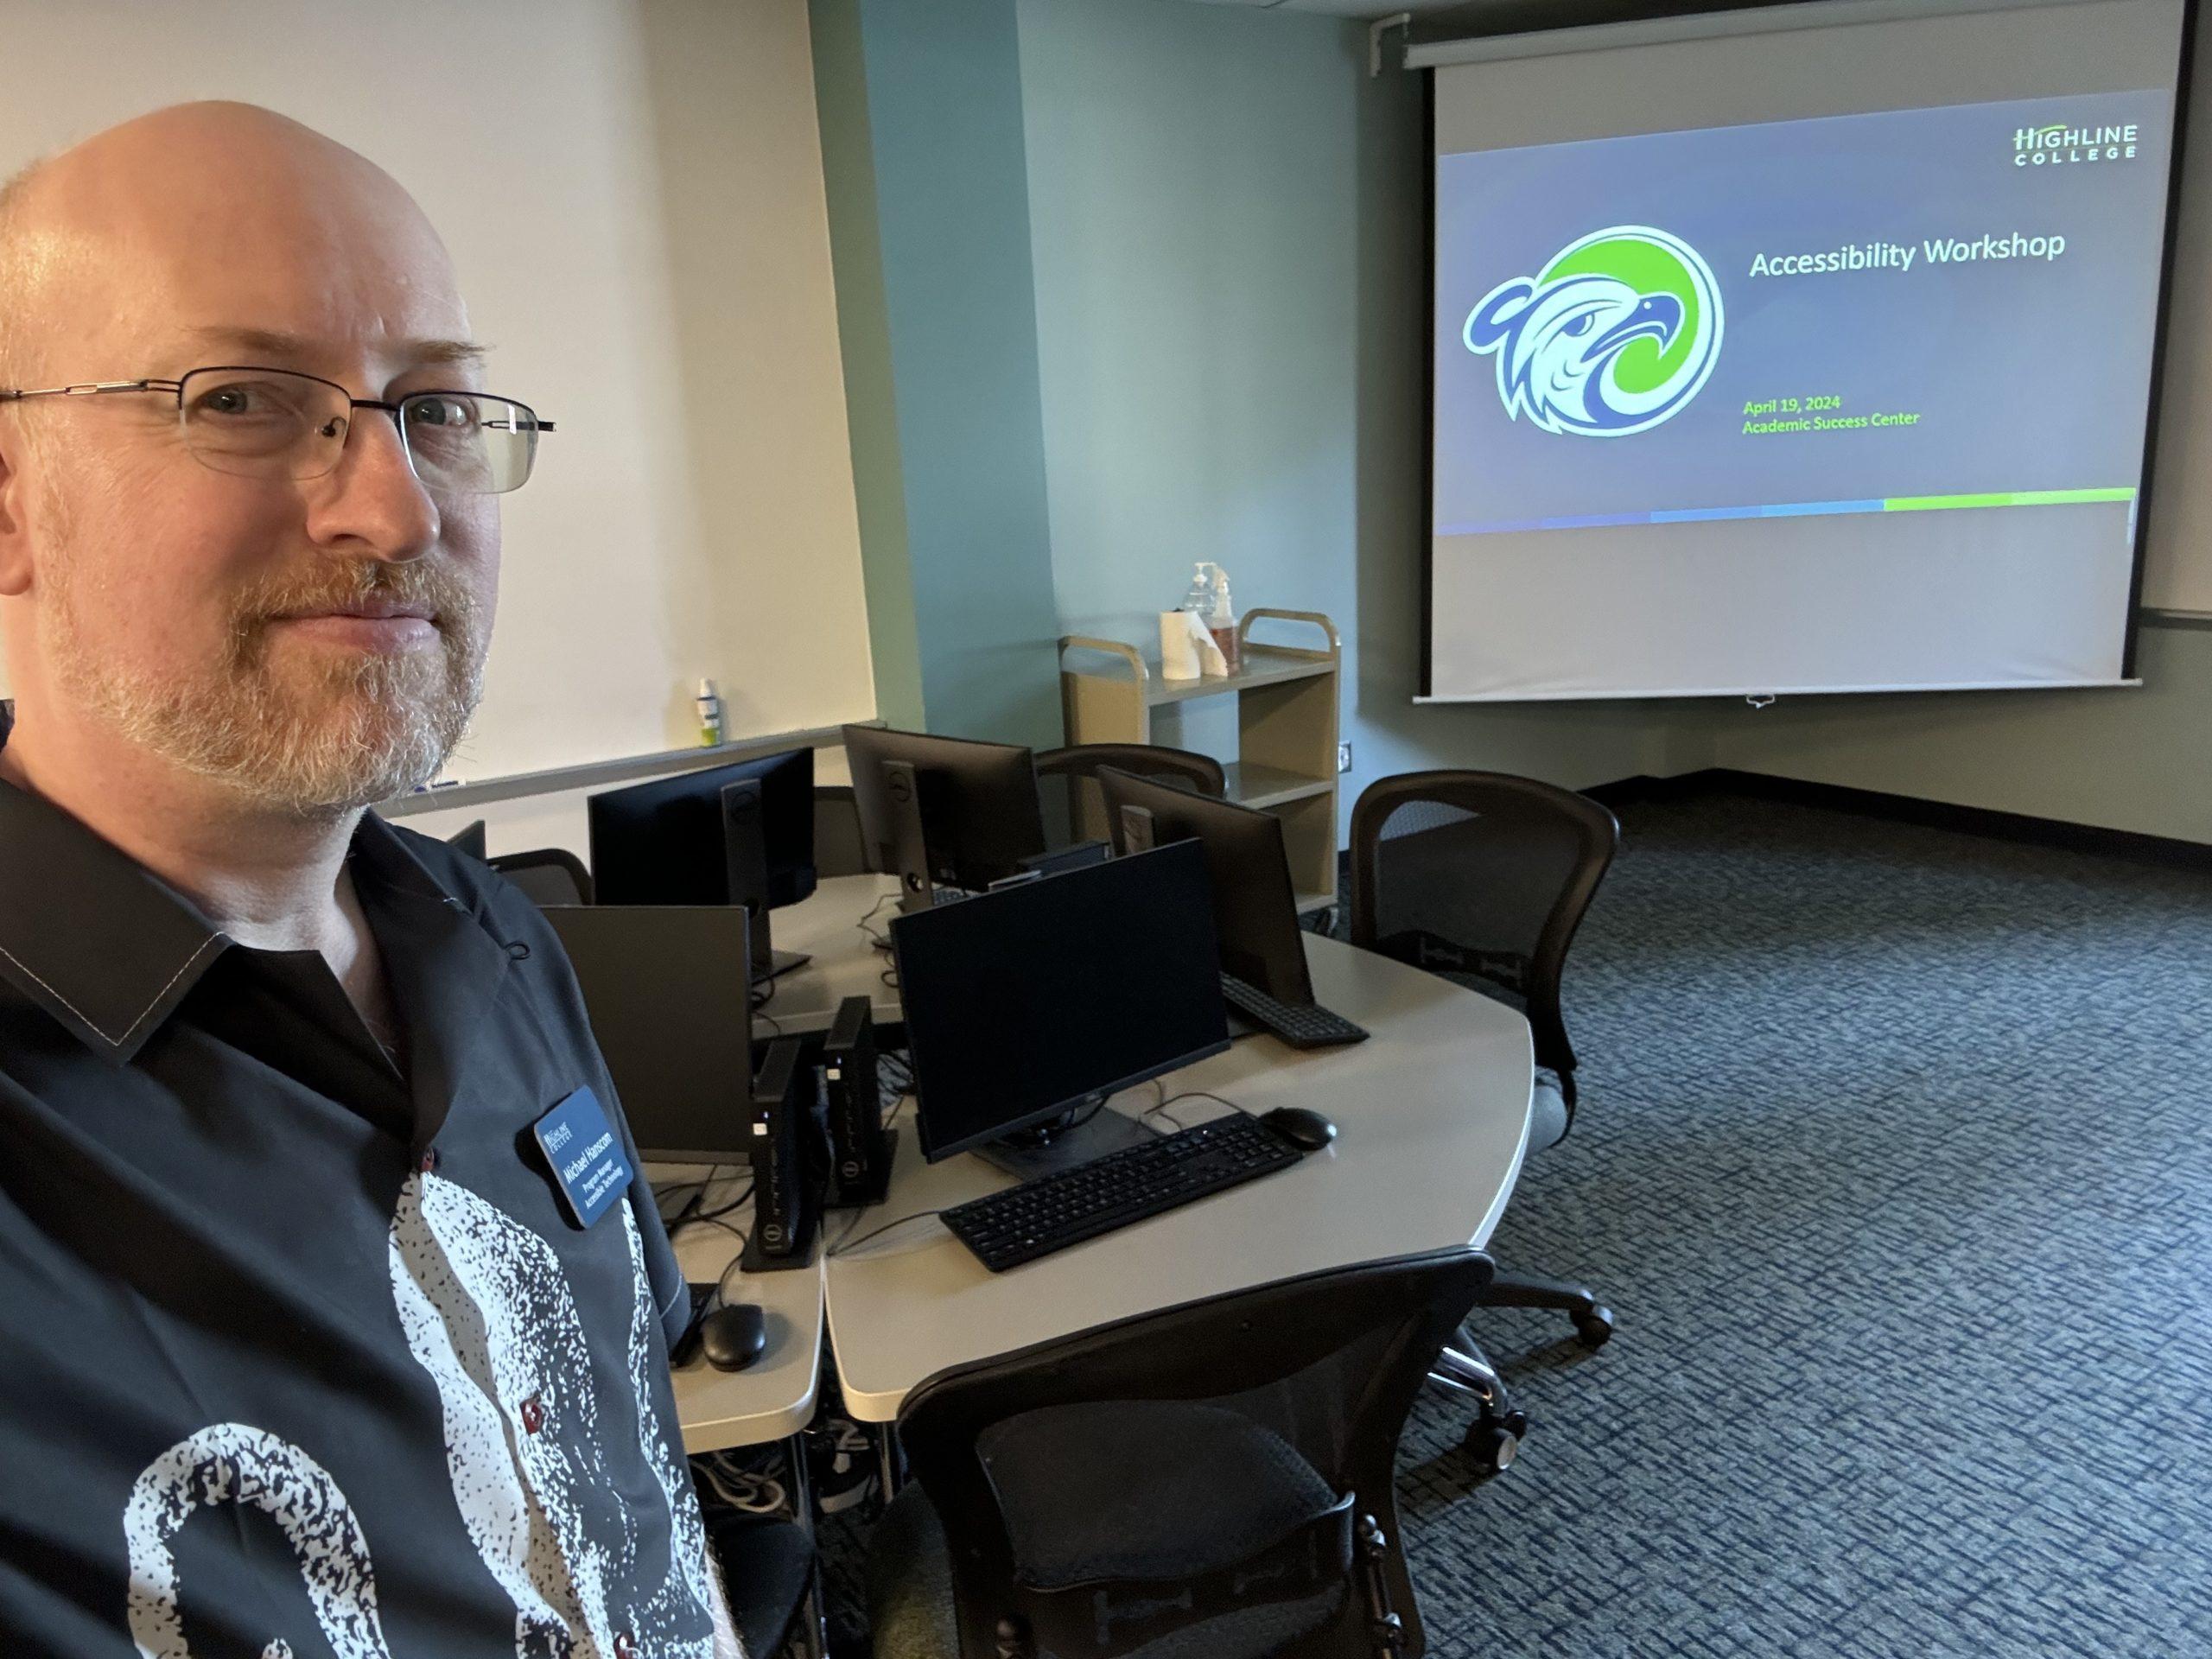 Me in a computer lab classroom, in front of a round table with several inactive workstations. Against the wall is a screen showing a slide with the Highline College logo and the title 'Accessibility Workshop'.